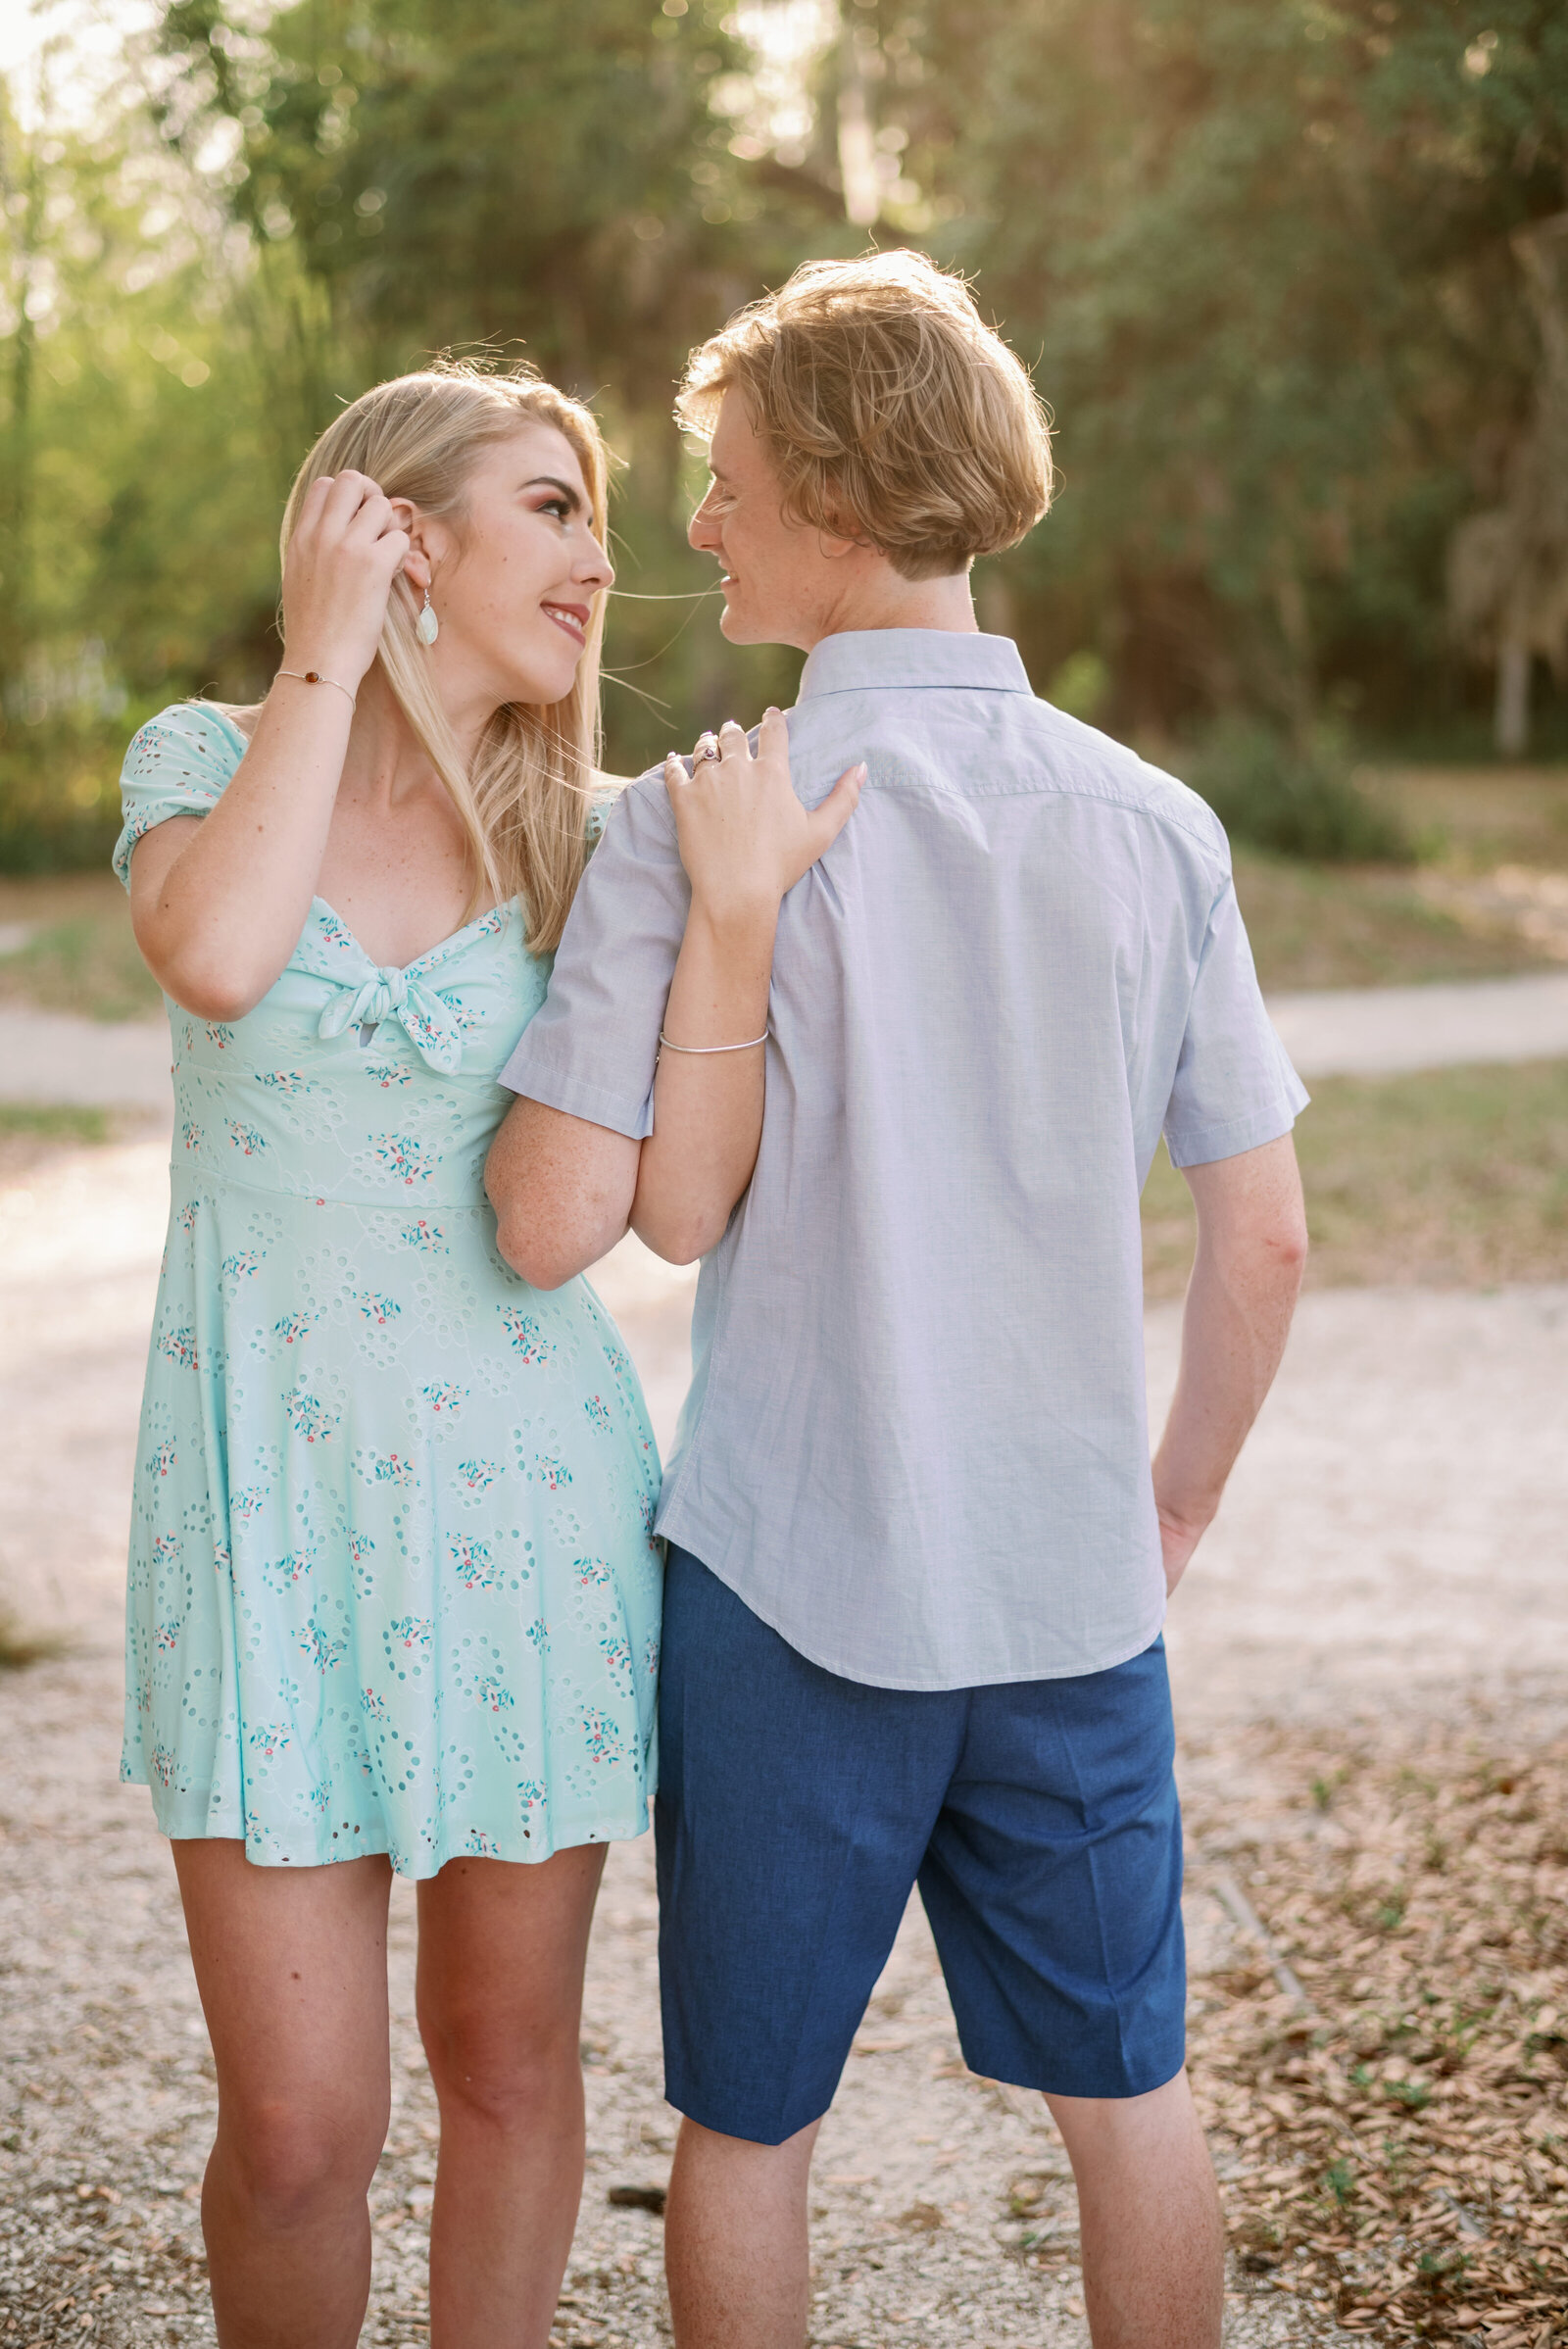 engaged couple standing opposite one another. She is facing the camera, looking at her fiancé while tucking her hair back behind her ear. He is standing with his back to the camera, looking at his faiancé. Their inner arms are folded together